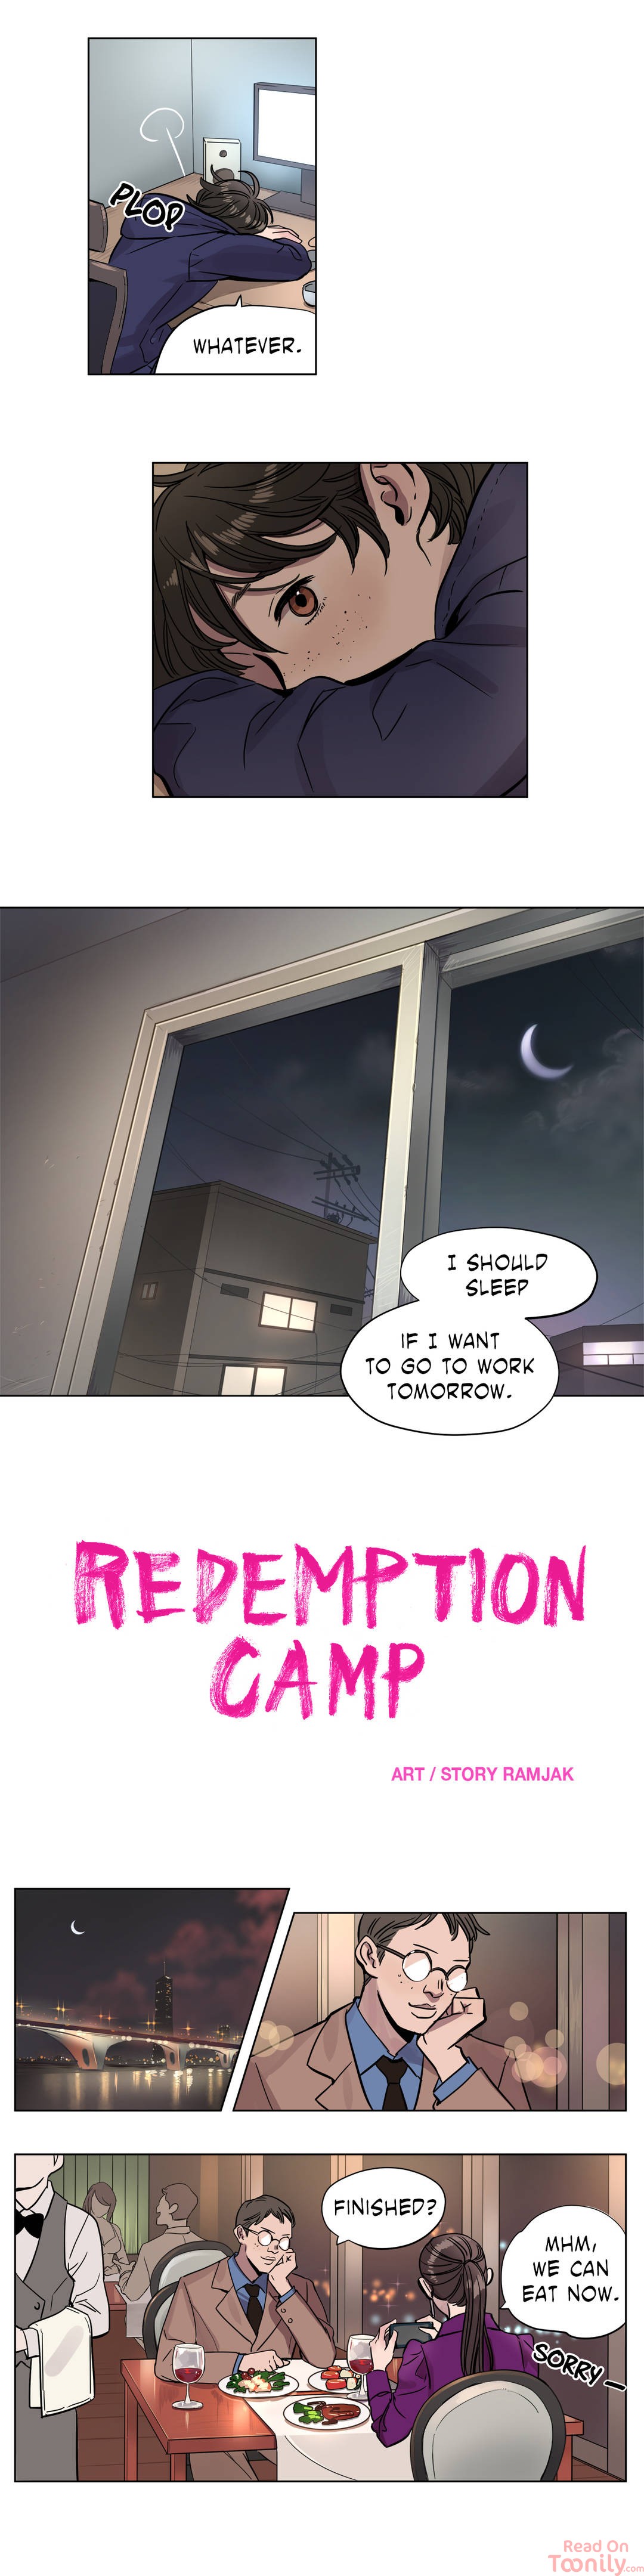 Redemption Camp - Chapter 2 Page 7